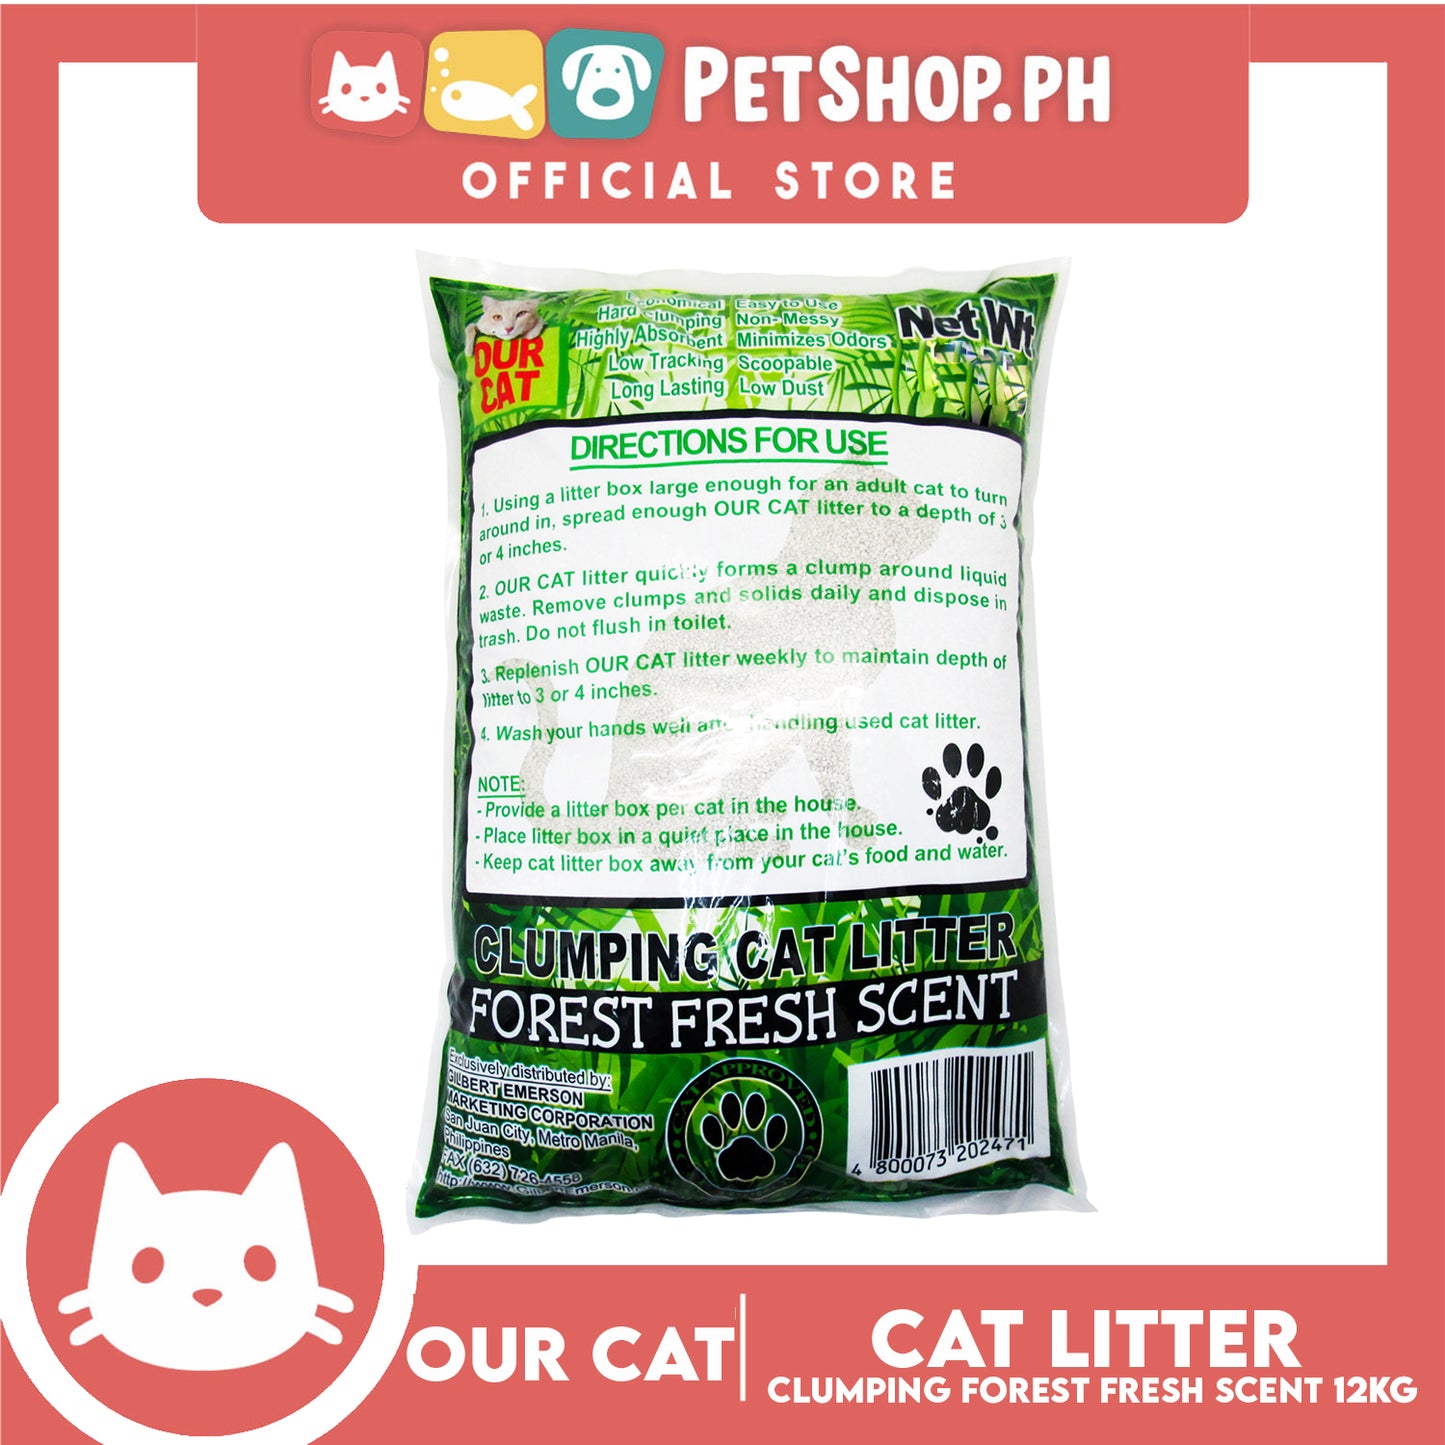 Our Cat Clumping Cat Litter Forest Fresh Scent 12kg